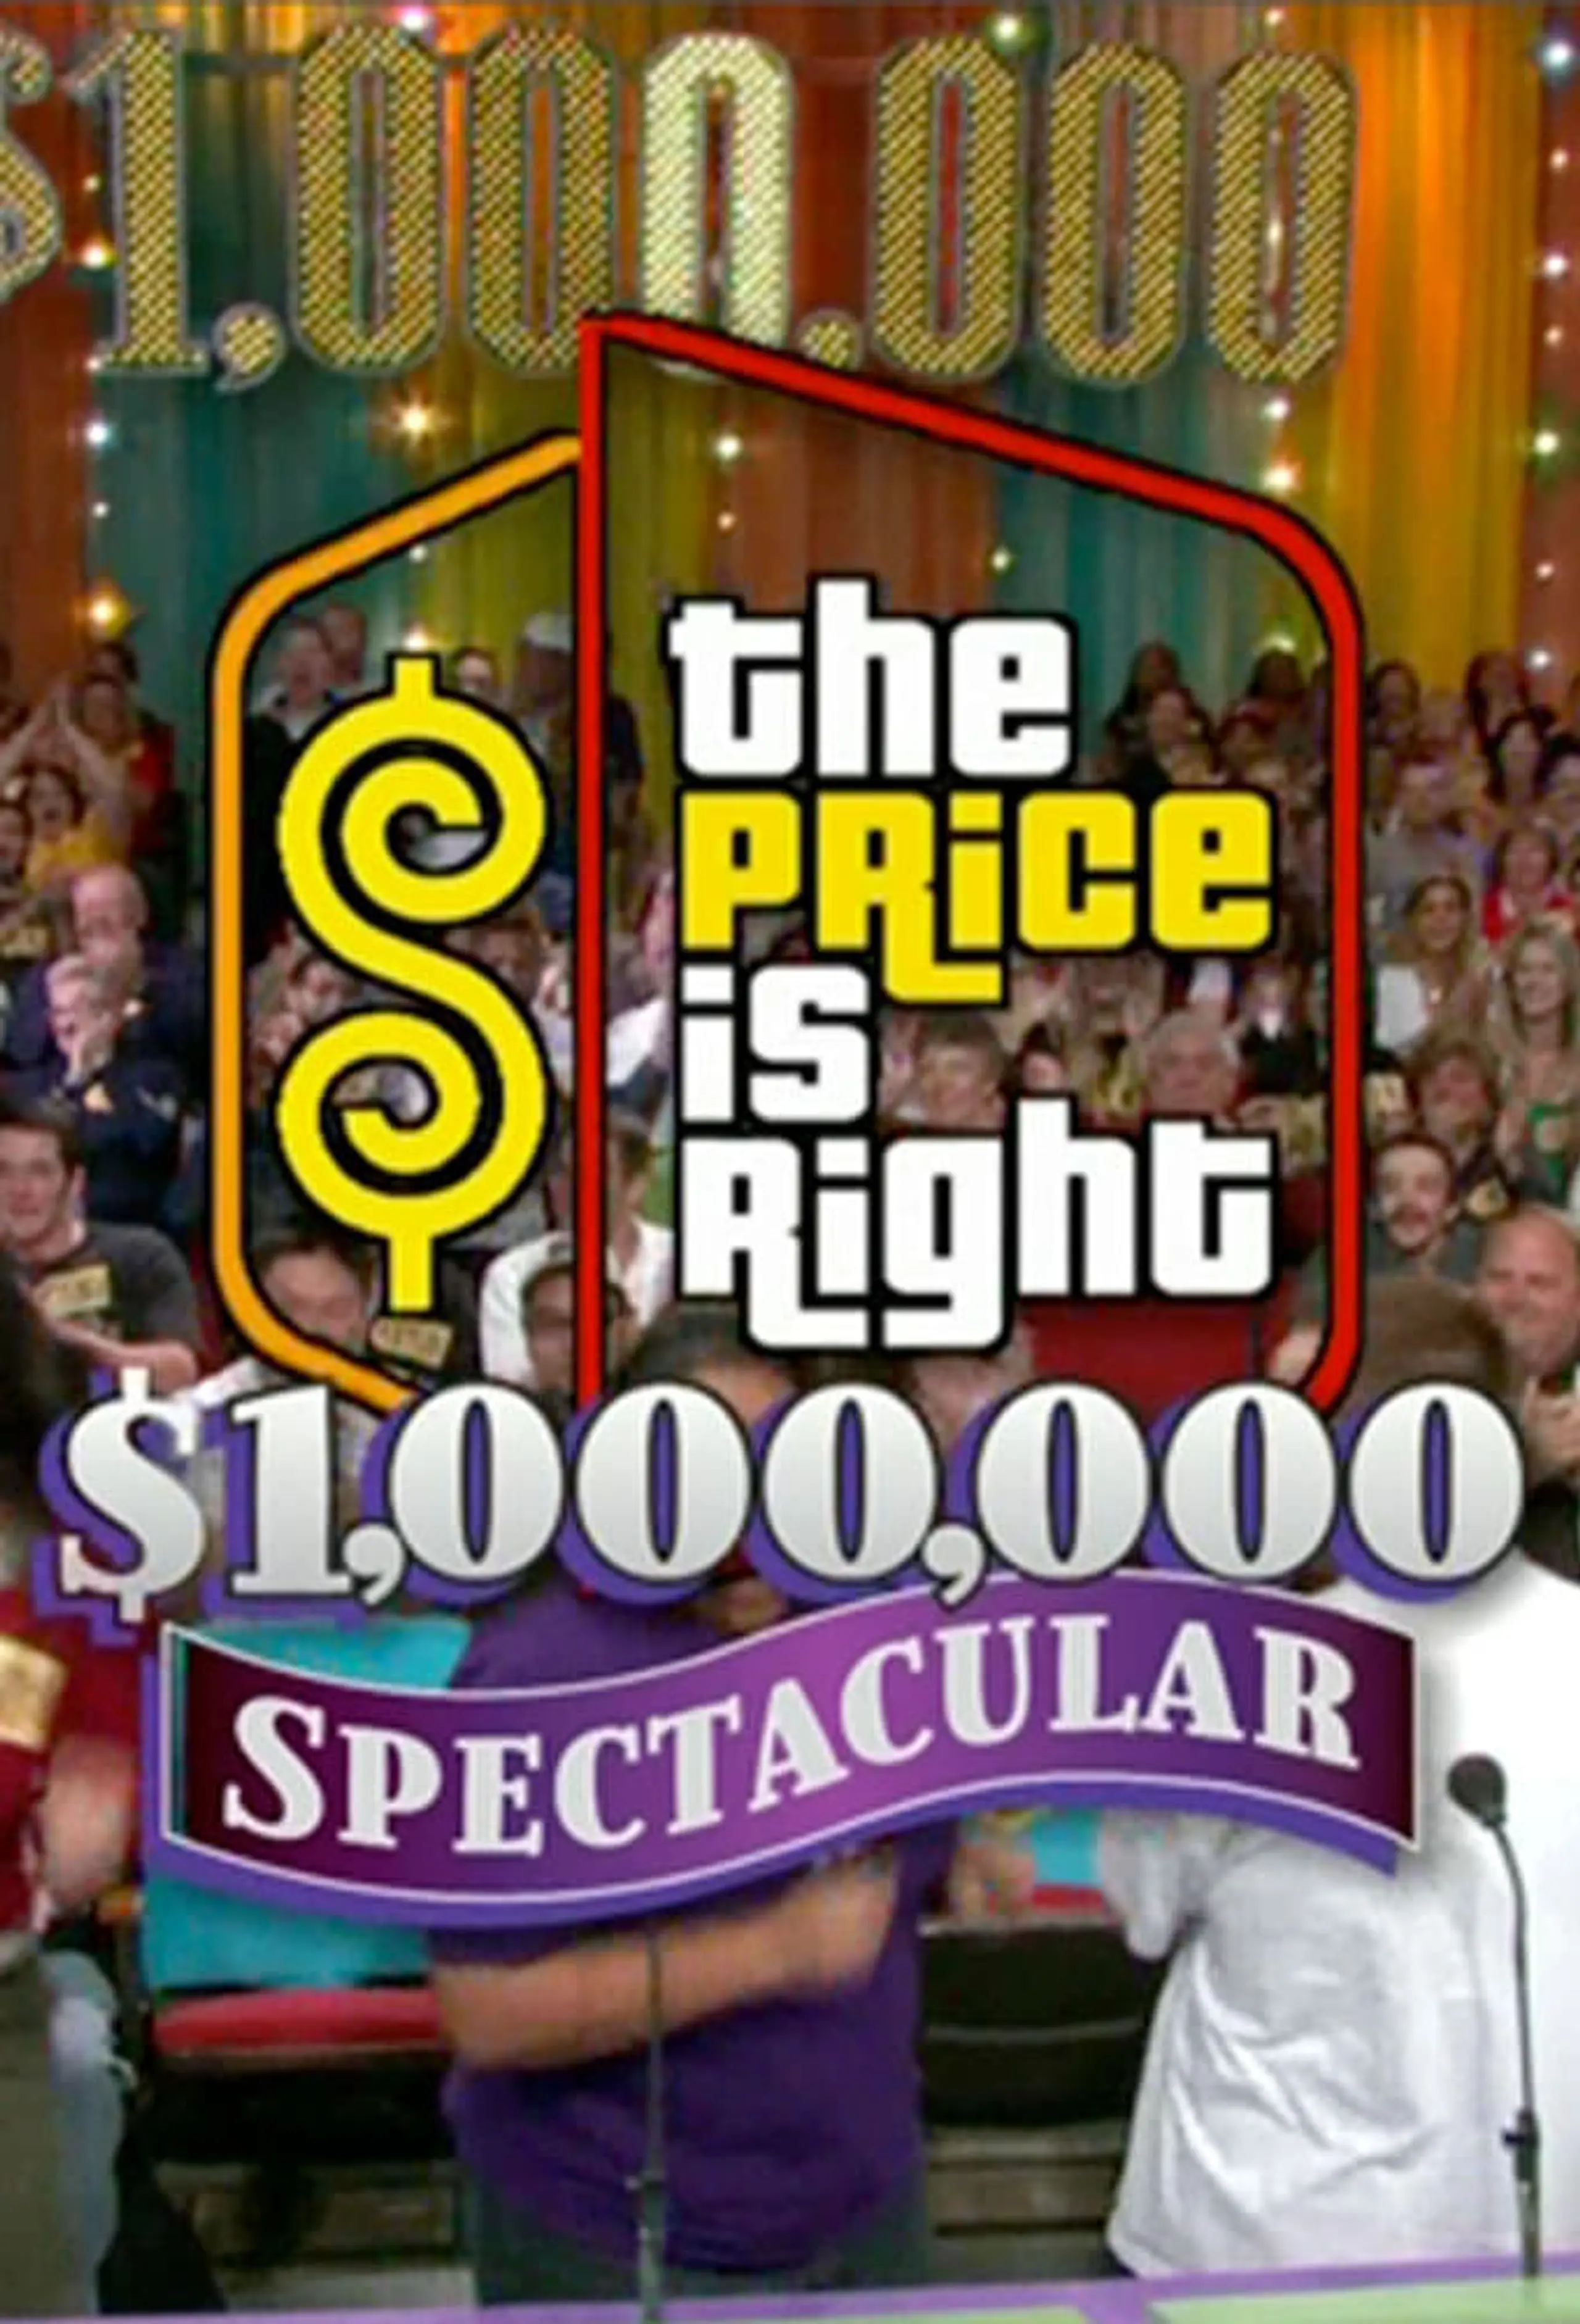 The Price is Right $1,000,000 Spectacular